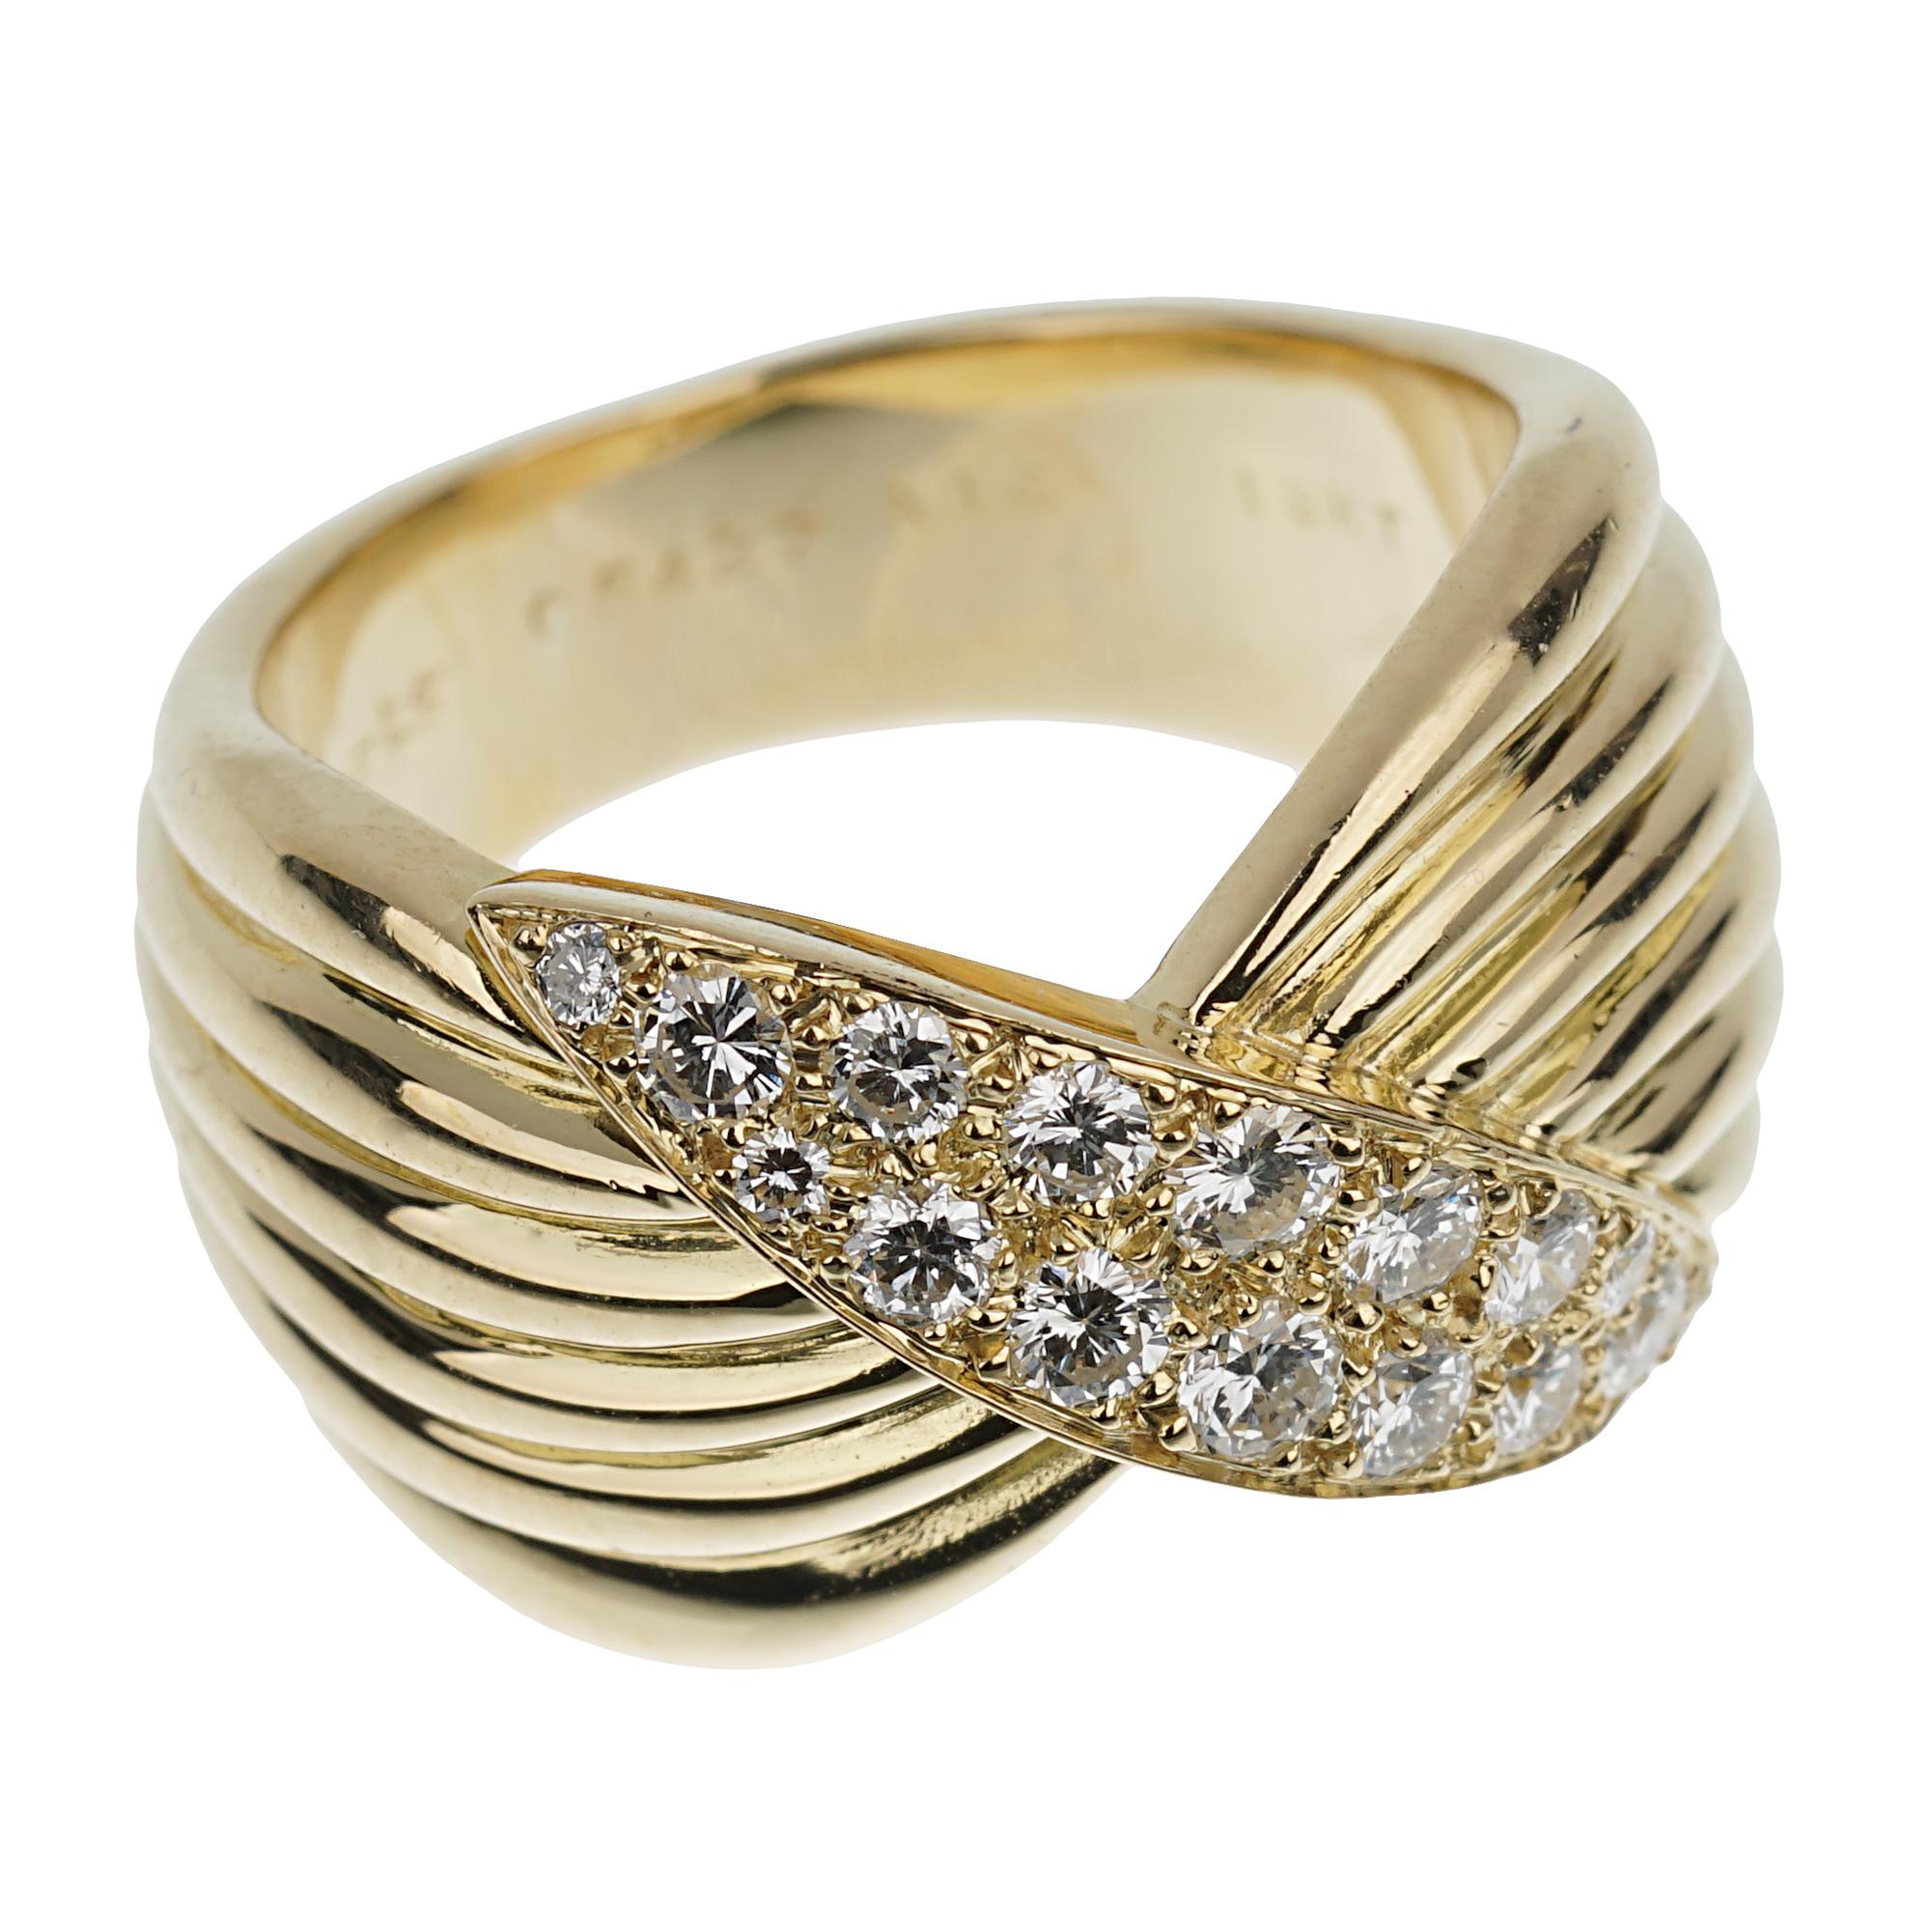 Imagine a stunning creation from the esteemed Van Cleef & Arpels, a Vintage Diamond Yellow Gold Cocktail Ring that exudes sophistication and timeless elegance. This masterpiece features an 18k yellow gold band, meticulously crafted to embody both